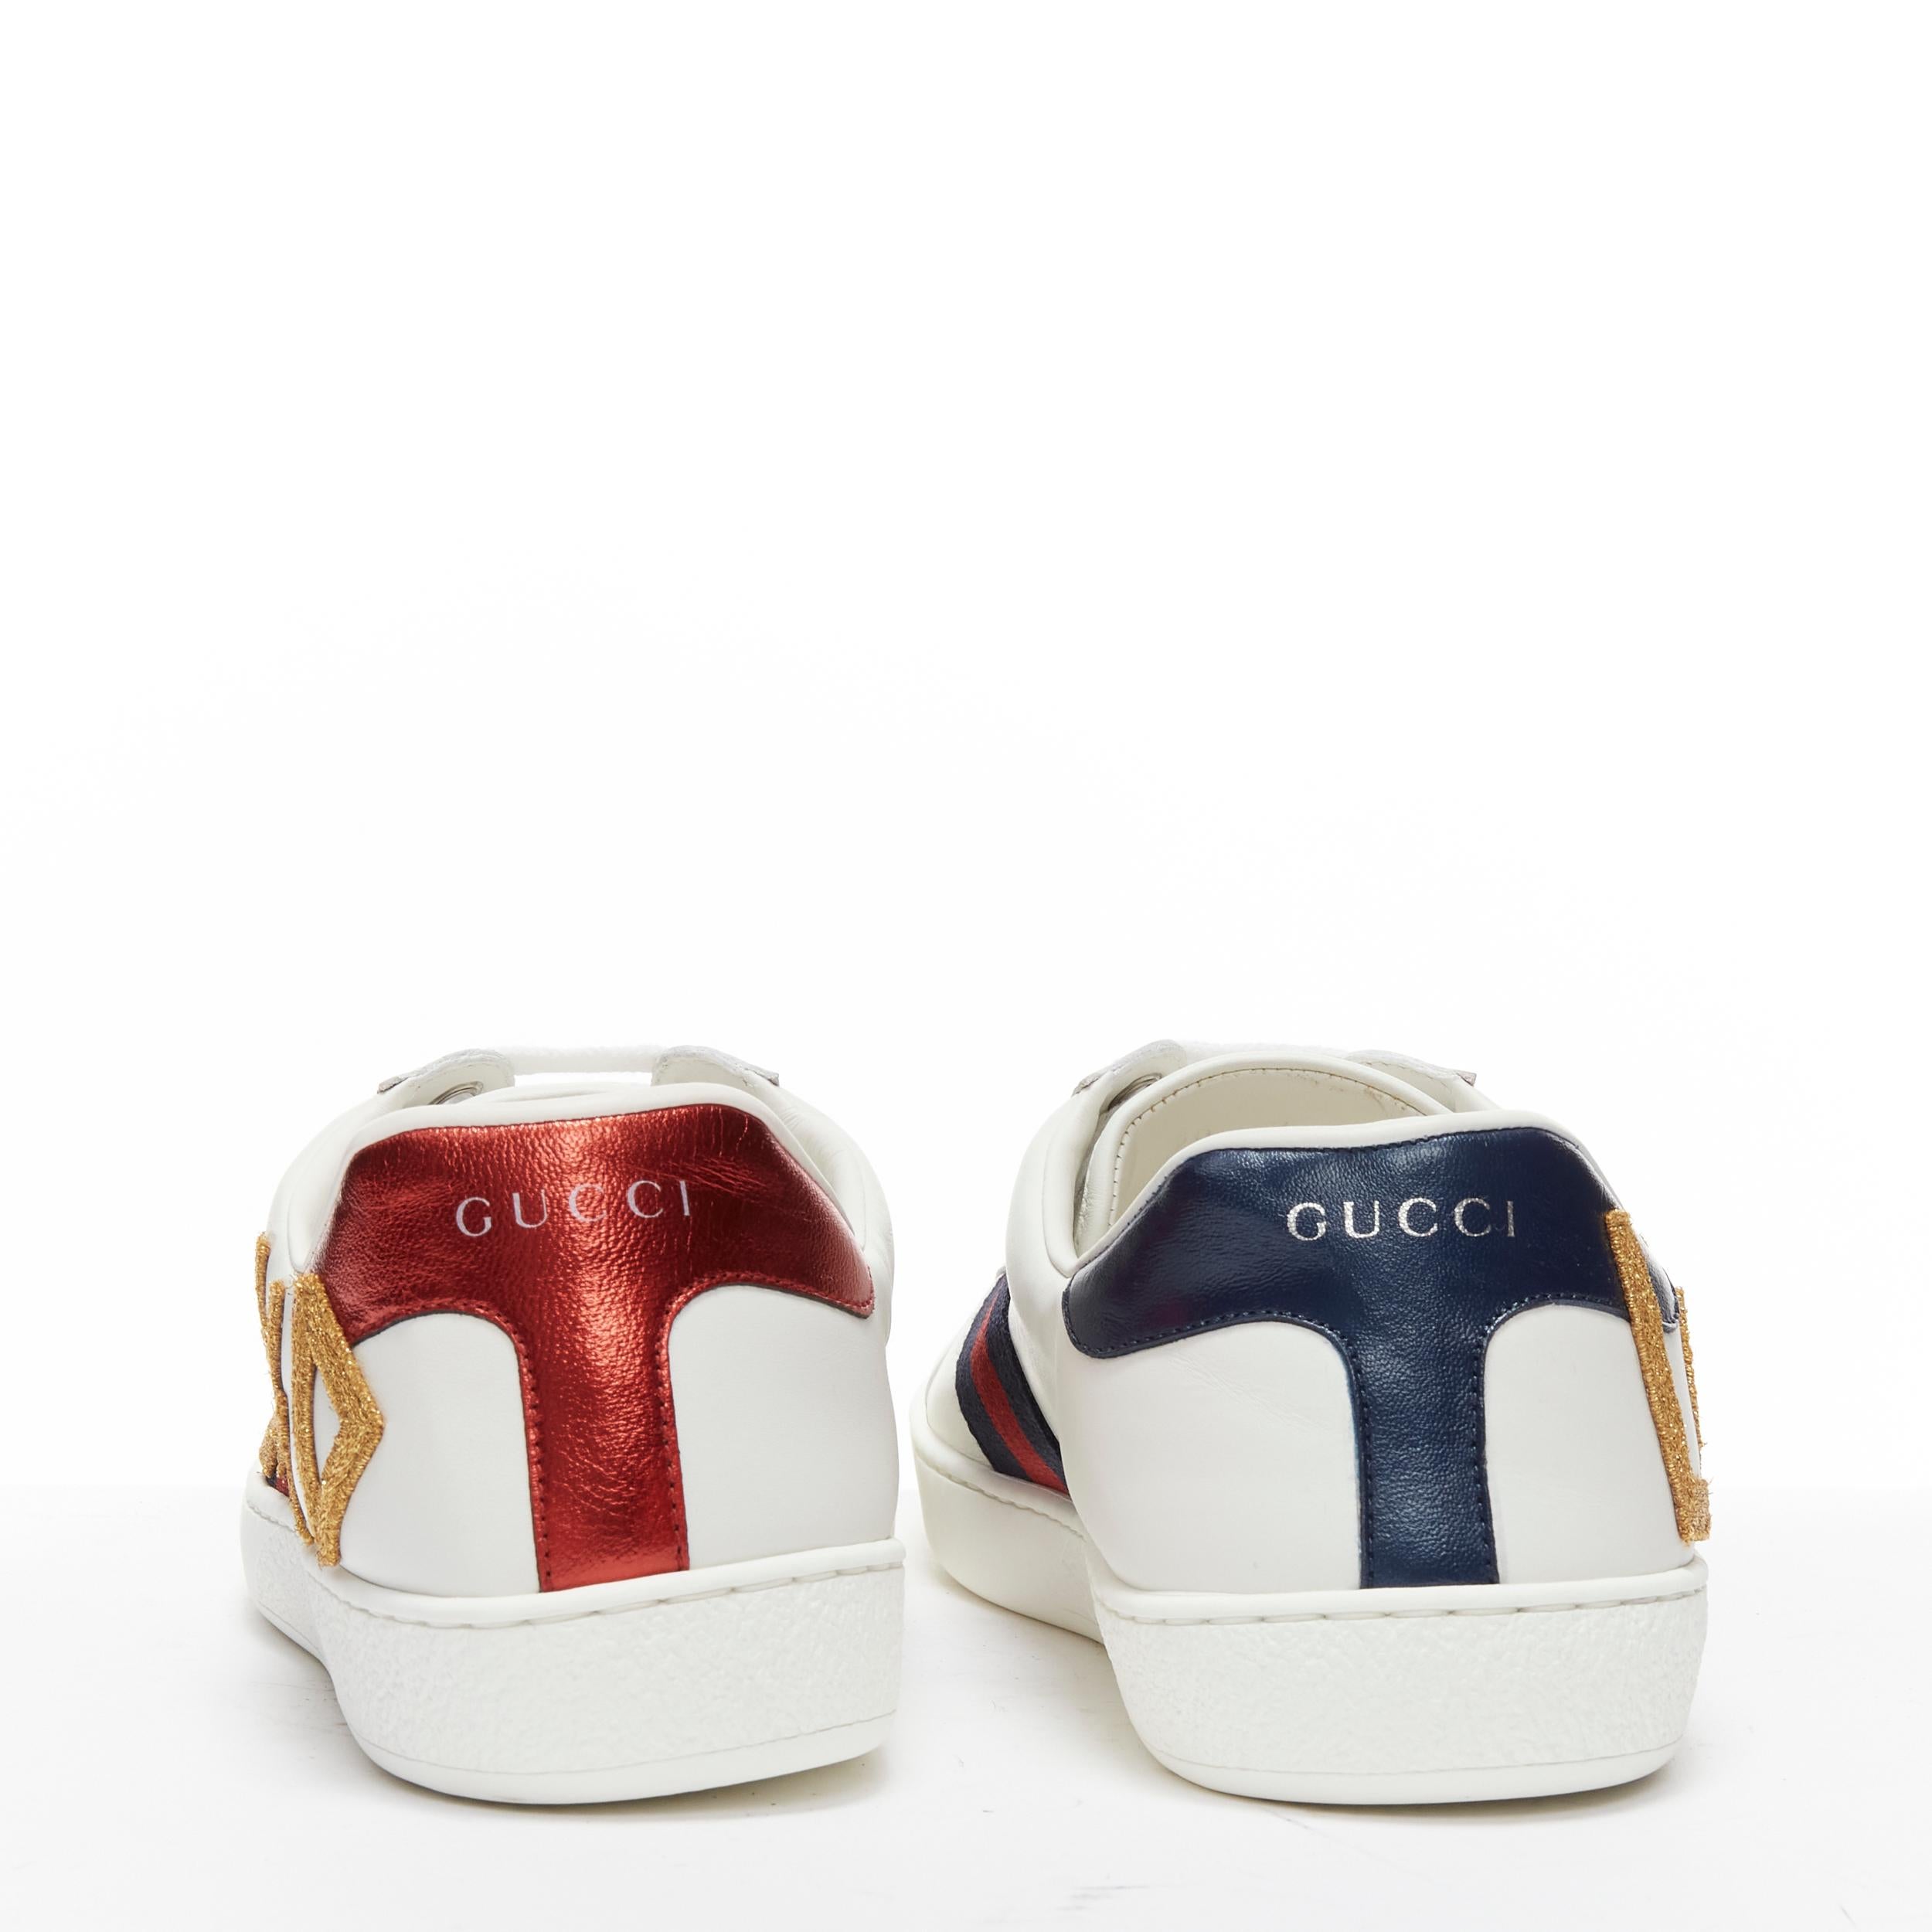 GUCCI Ace Loved gold embroidered blue red web leather sneakers UK7 EU41 For Sale 1